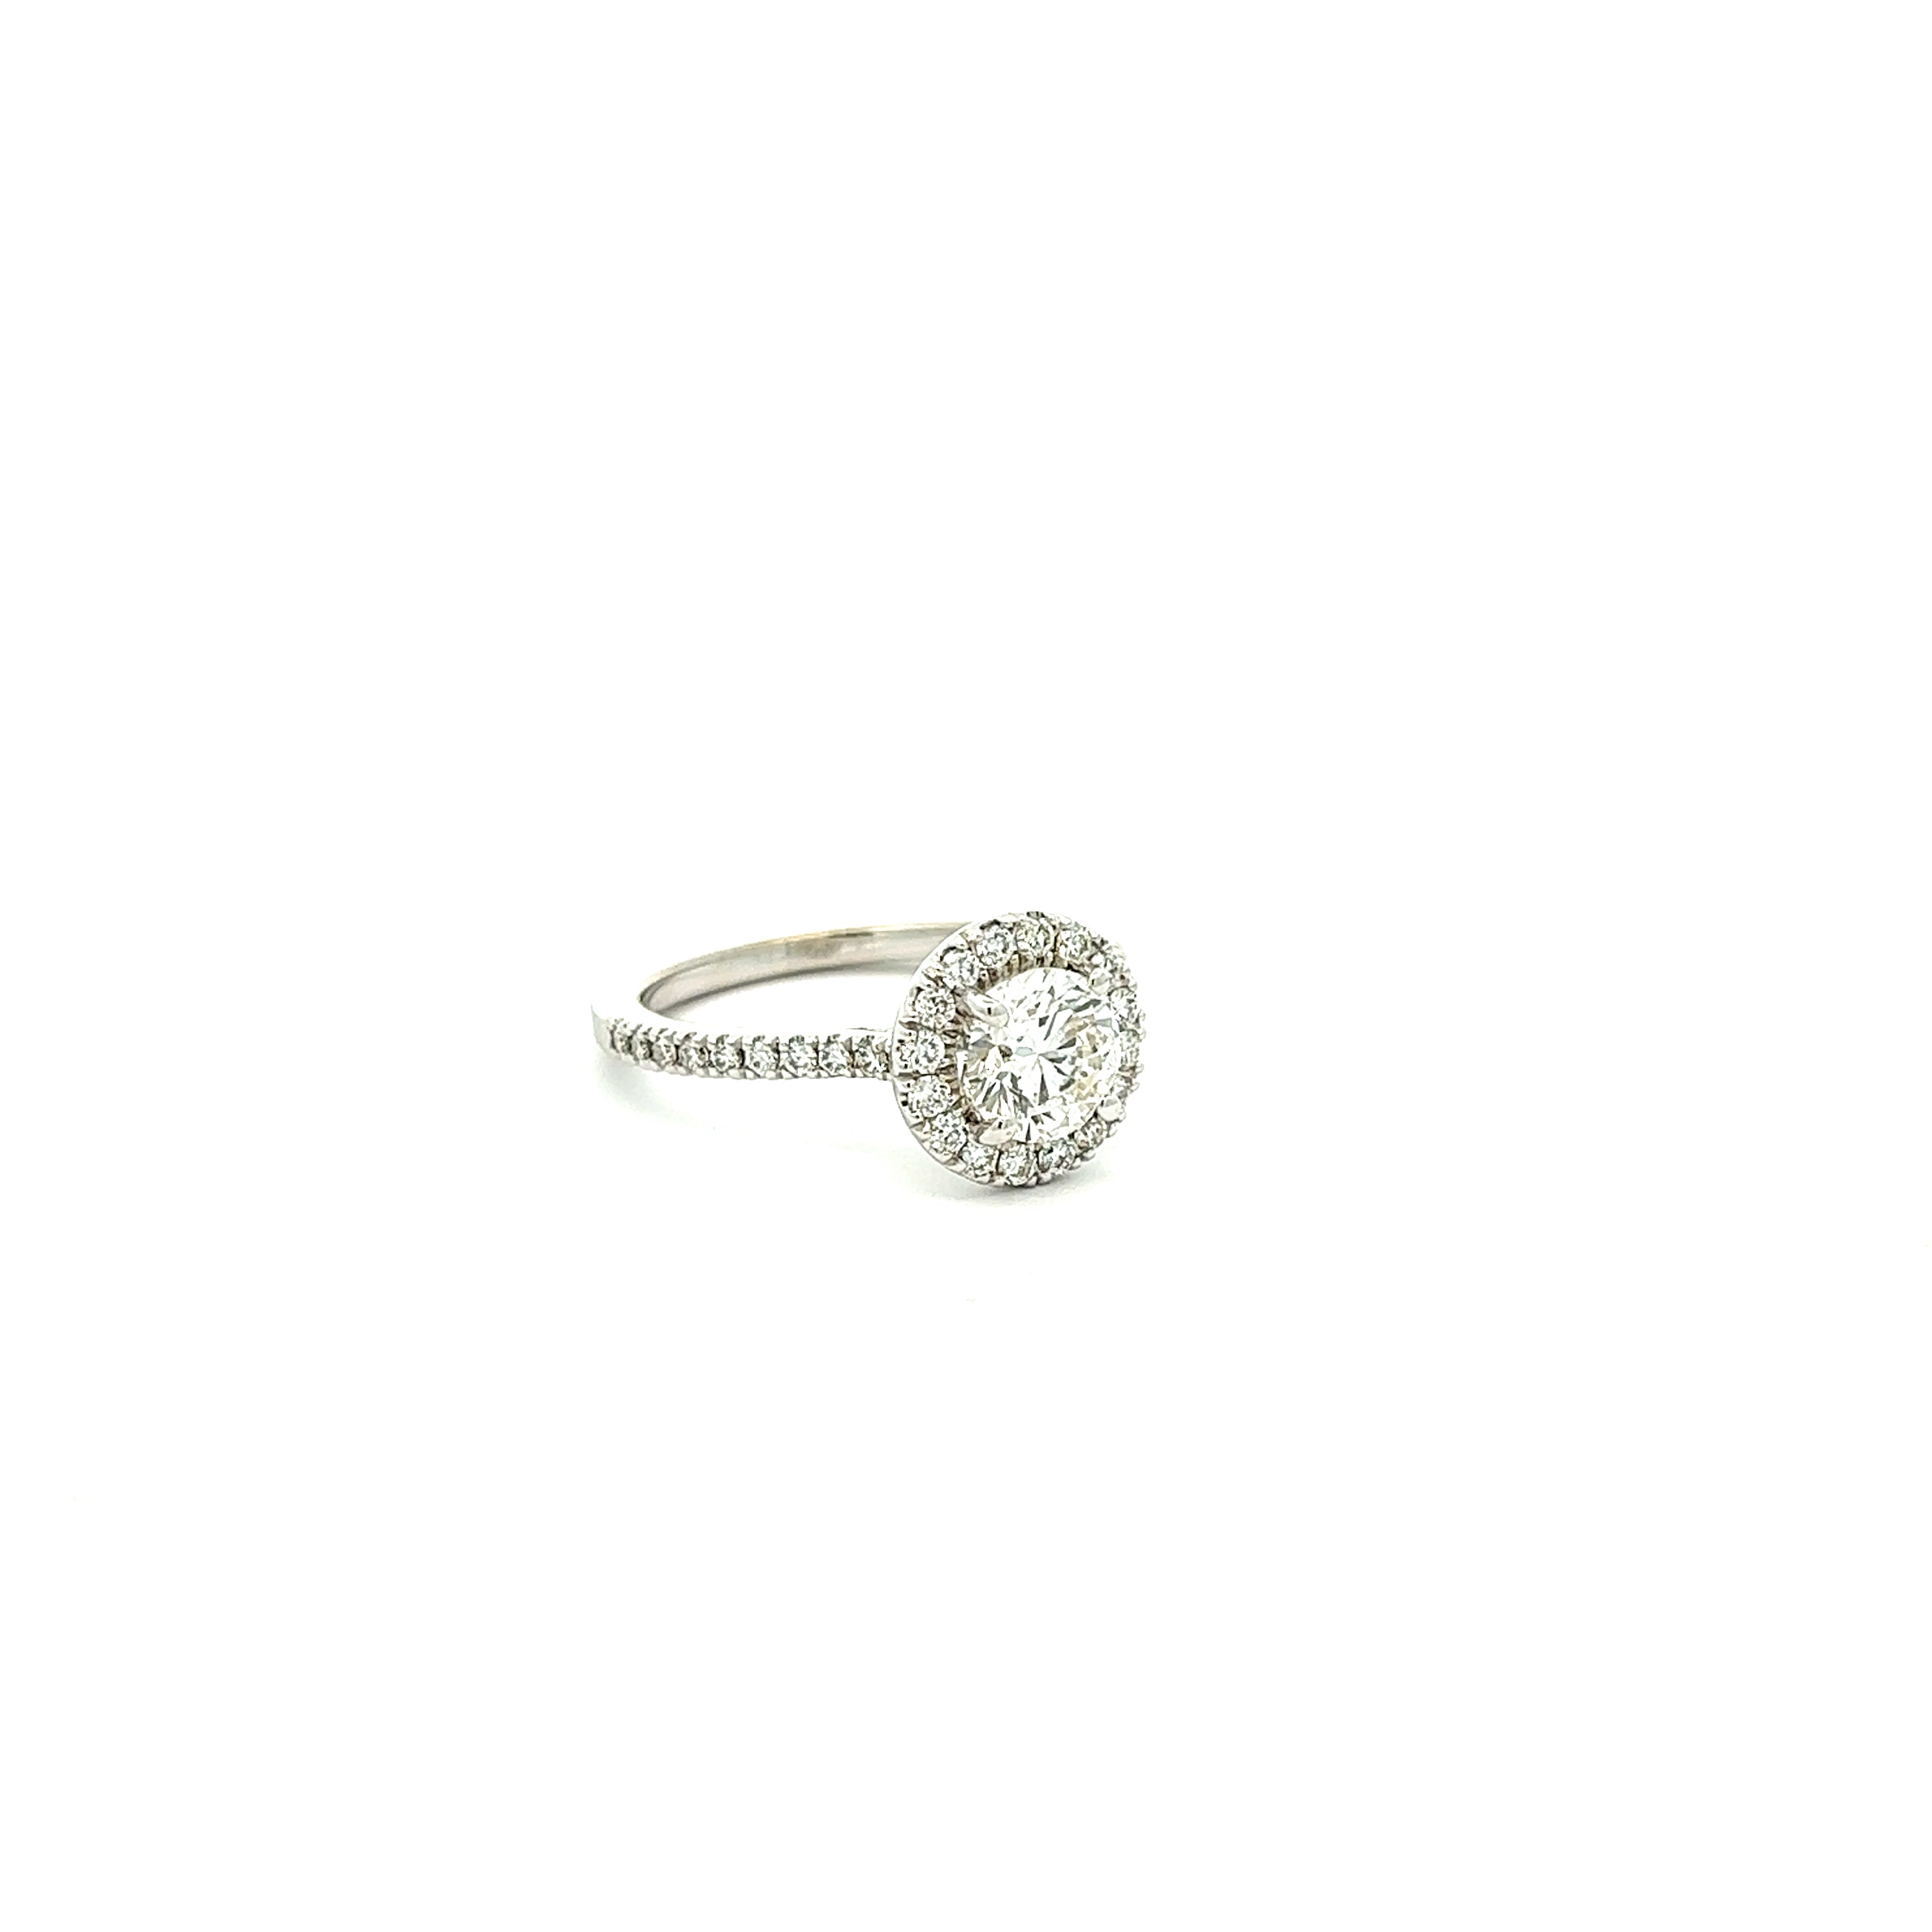 The Terry 18k White Gold Round Halo Diamond Engagement Ring